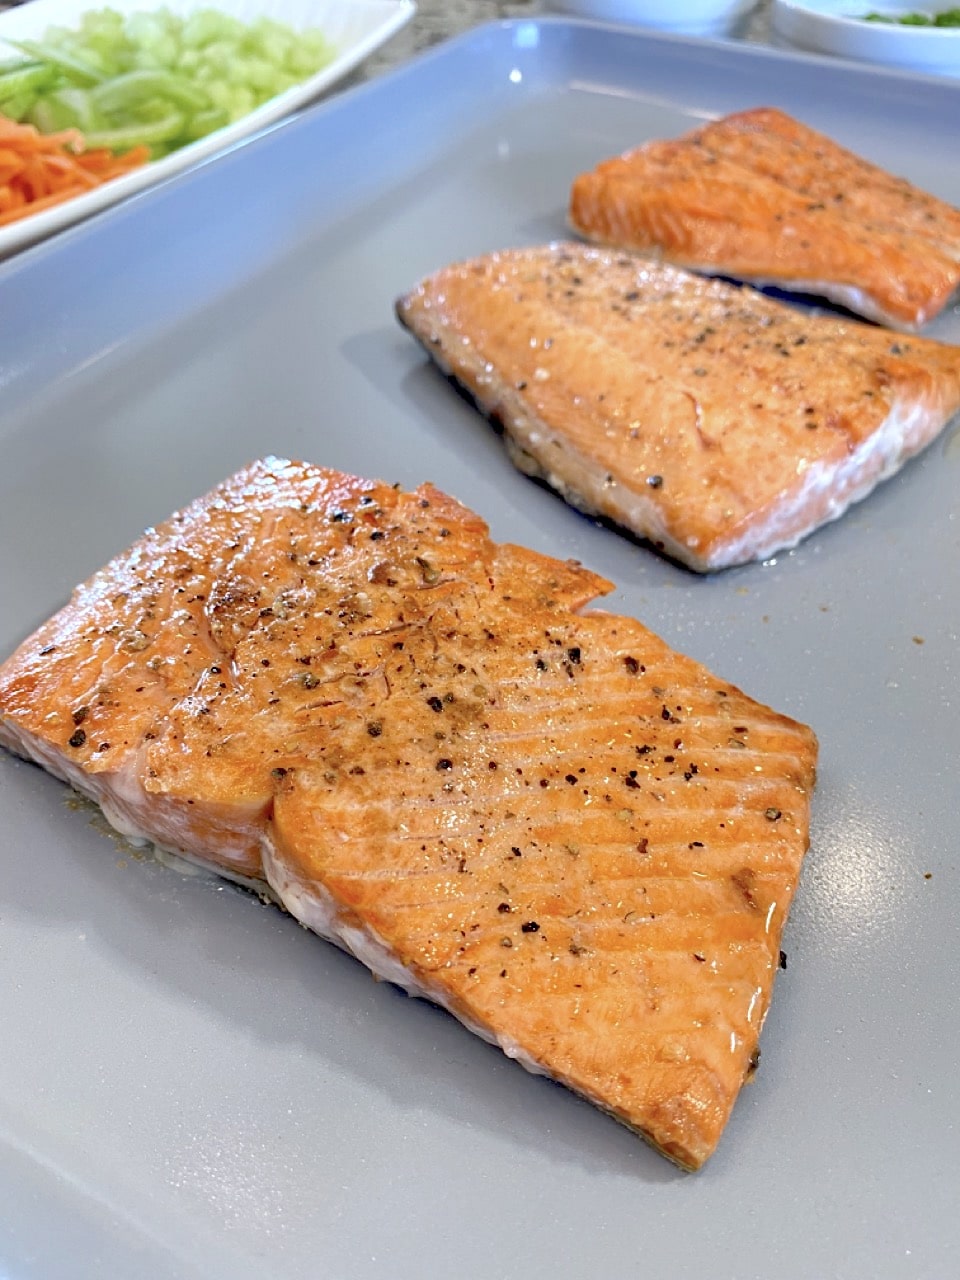 How to cook salmon perfectly